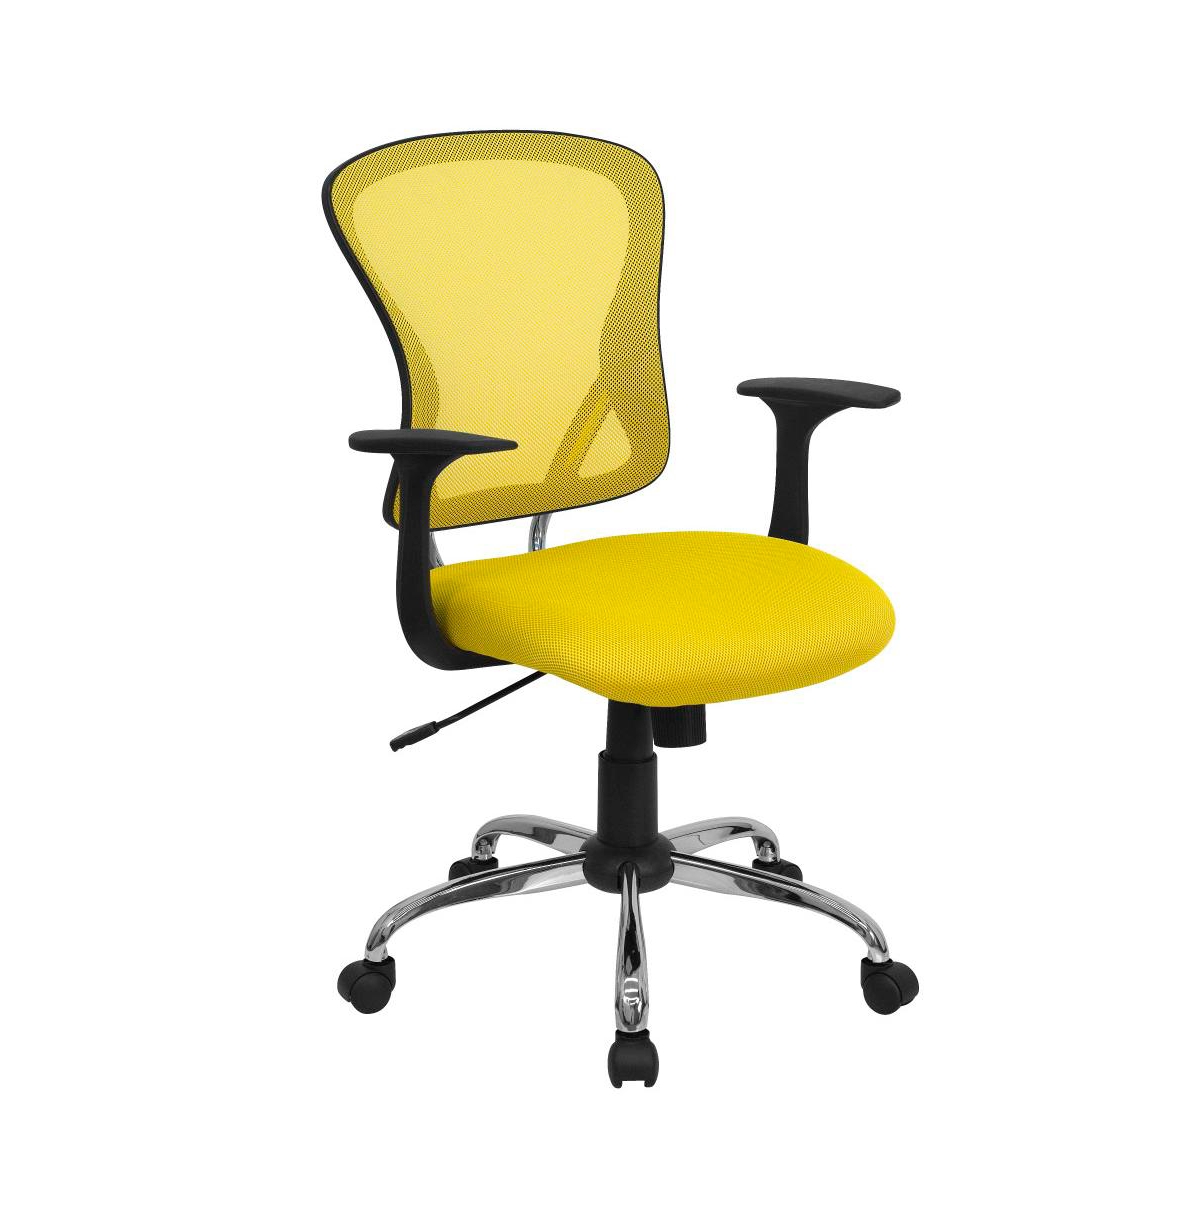 Emma+oliver Mid-back Mesh Swivel Task Office Chair With Chrome Base And Arms In Yellow